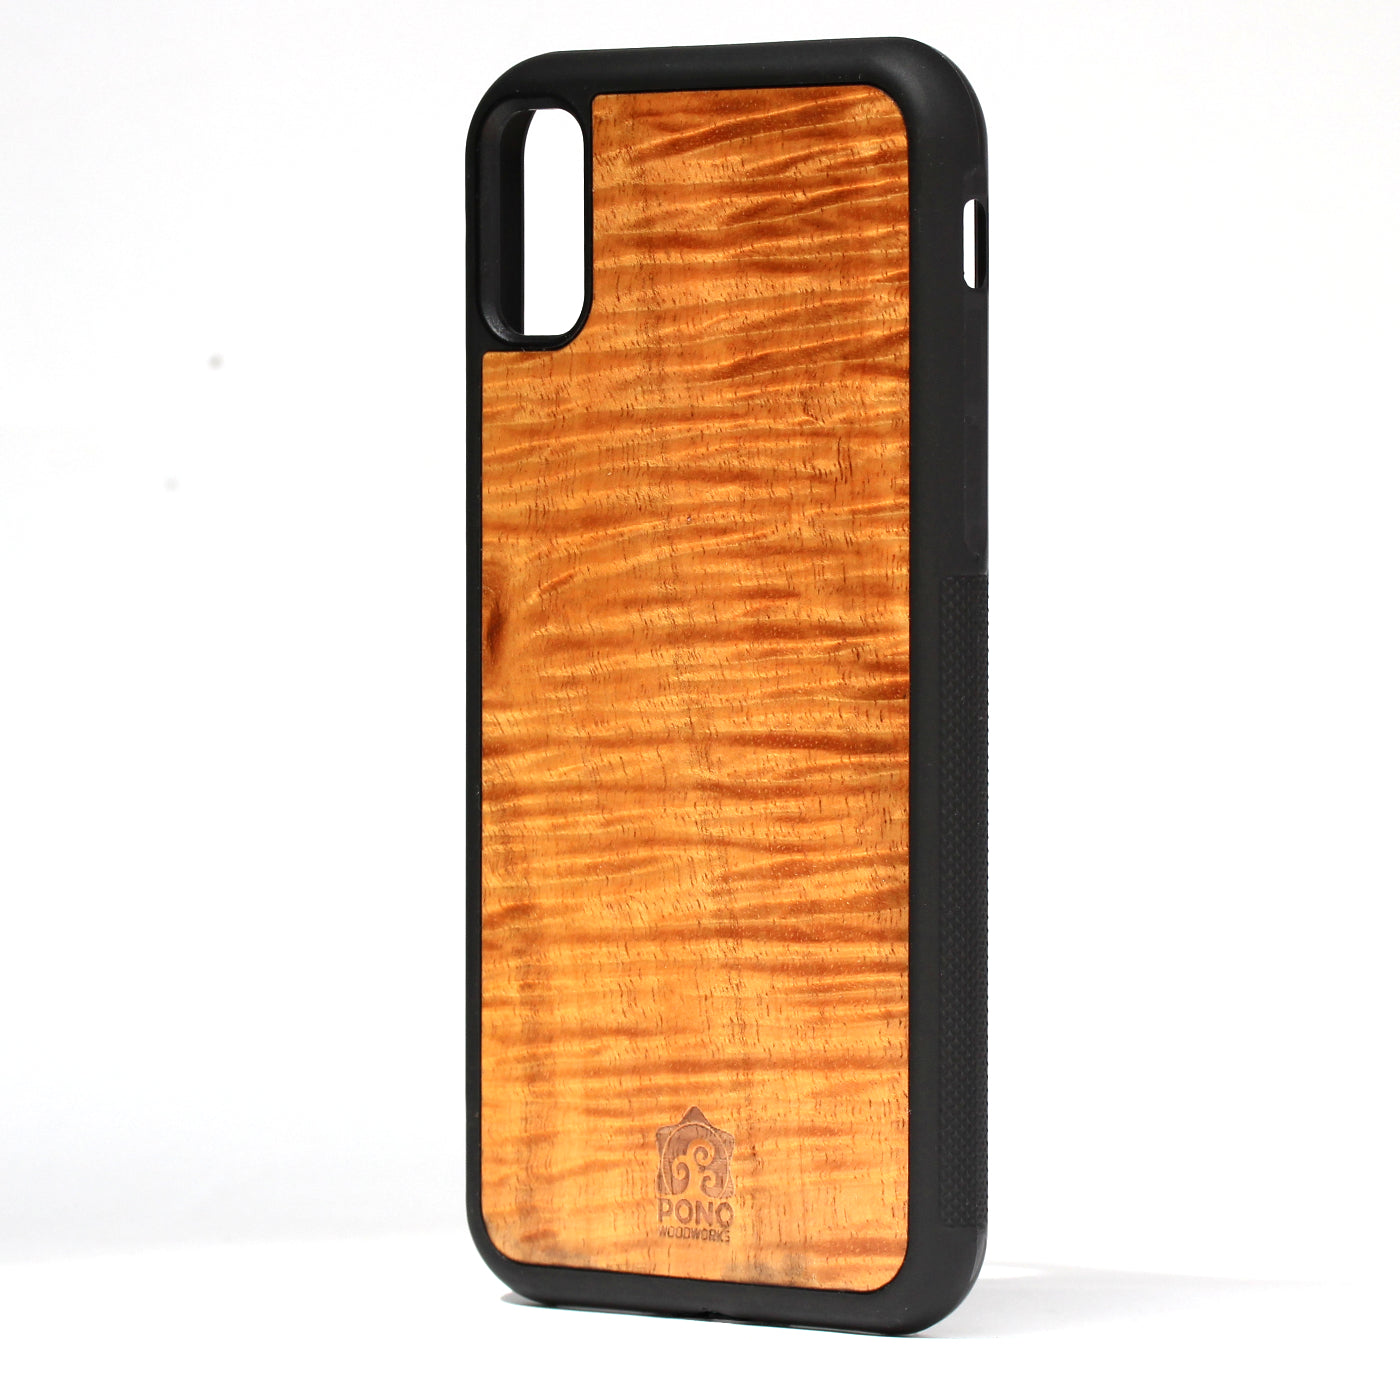 Ultra thin iPhone 14 Pro Max Slim Case made of wood